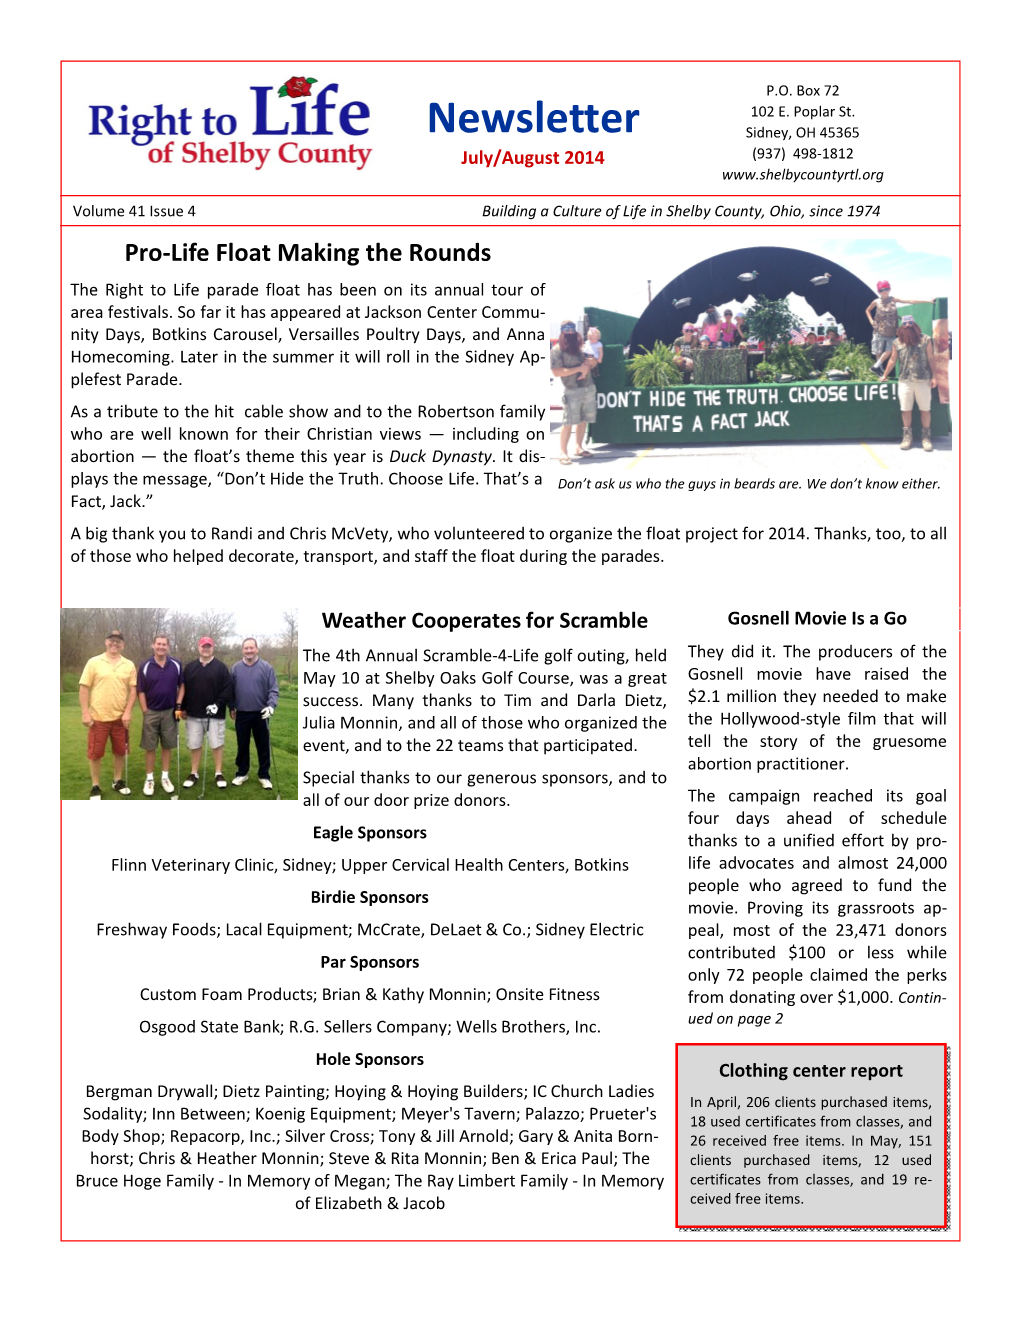 Newsletter Sidney, OH 45365 July/August 2014 (937) 498-1812